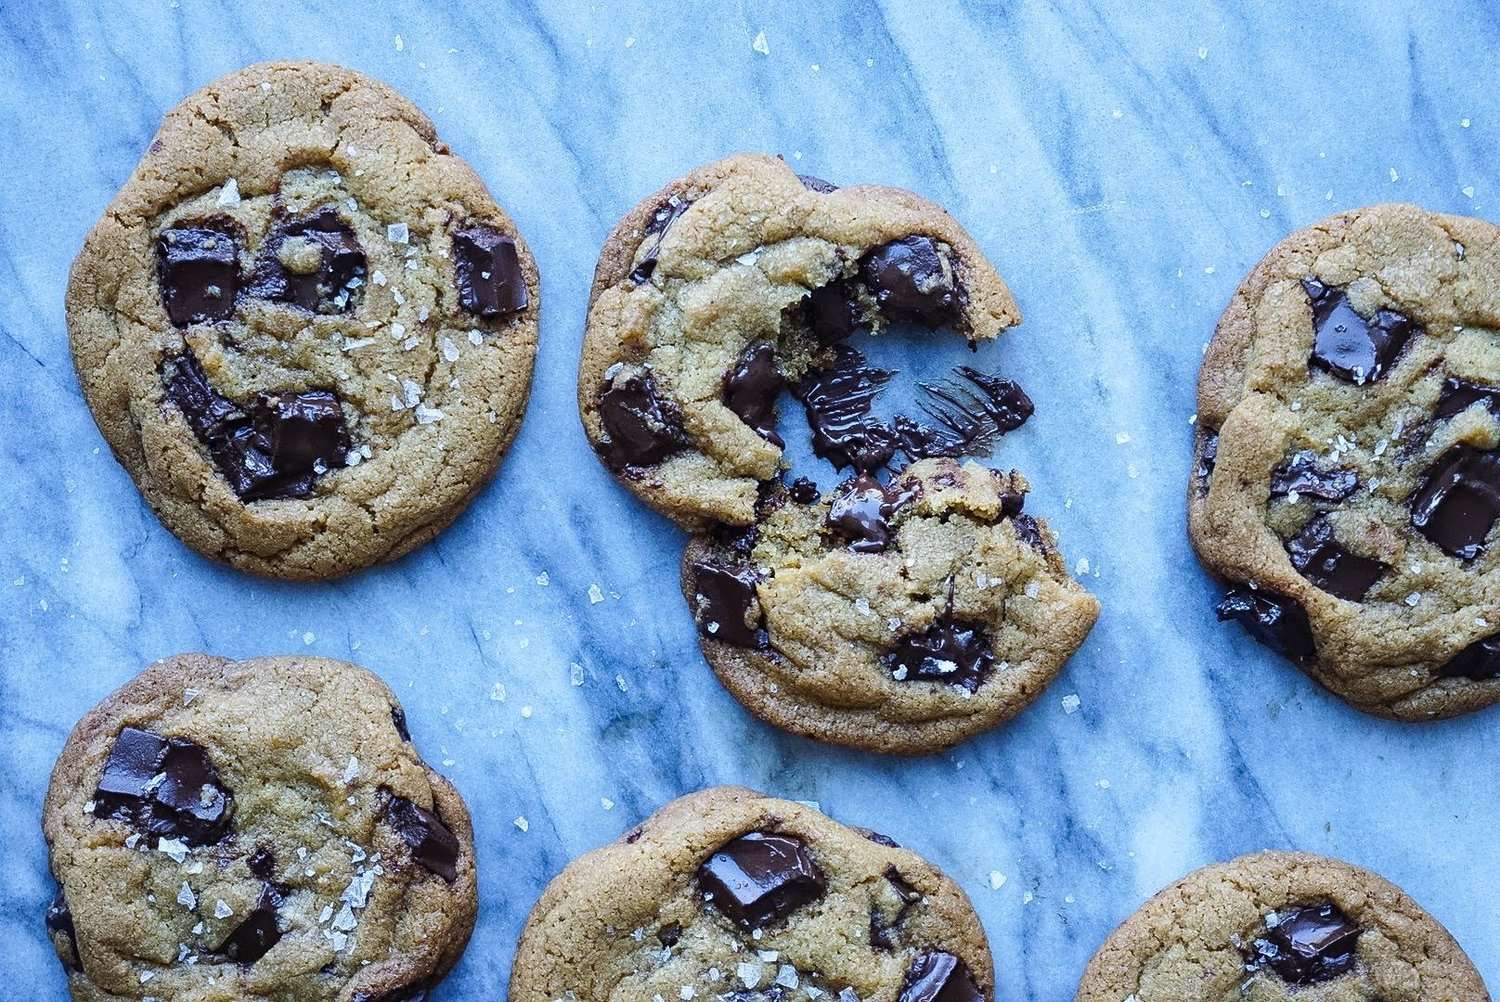 olive-oil-chocolate-chip-cookies-just-pantry-staples-totally-vegan